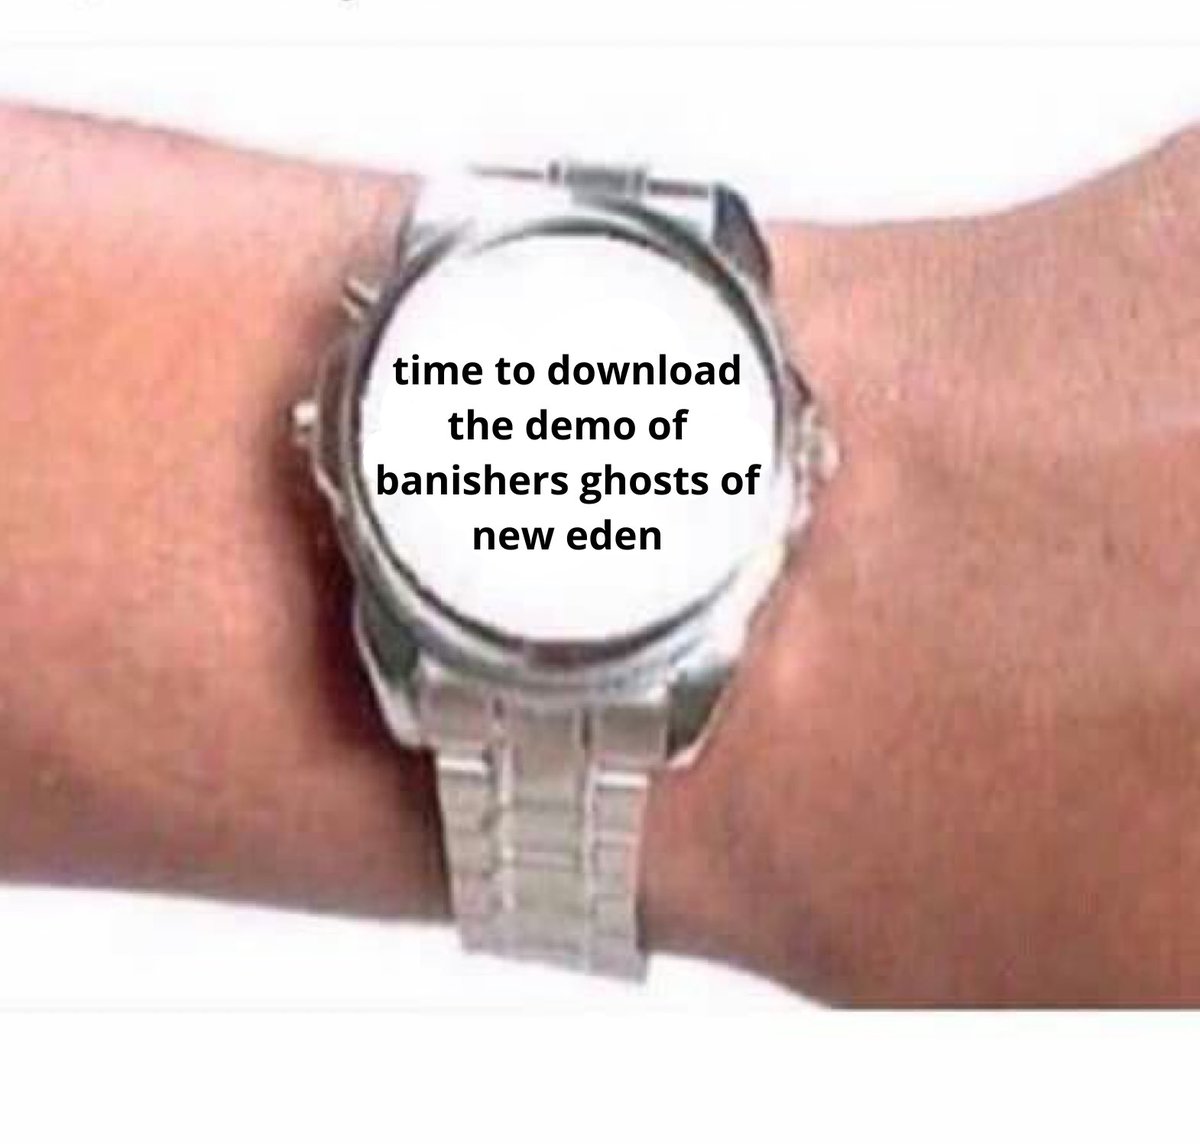 Well would you look at the time